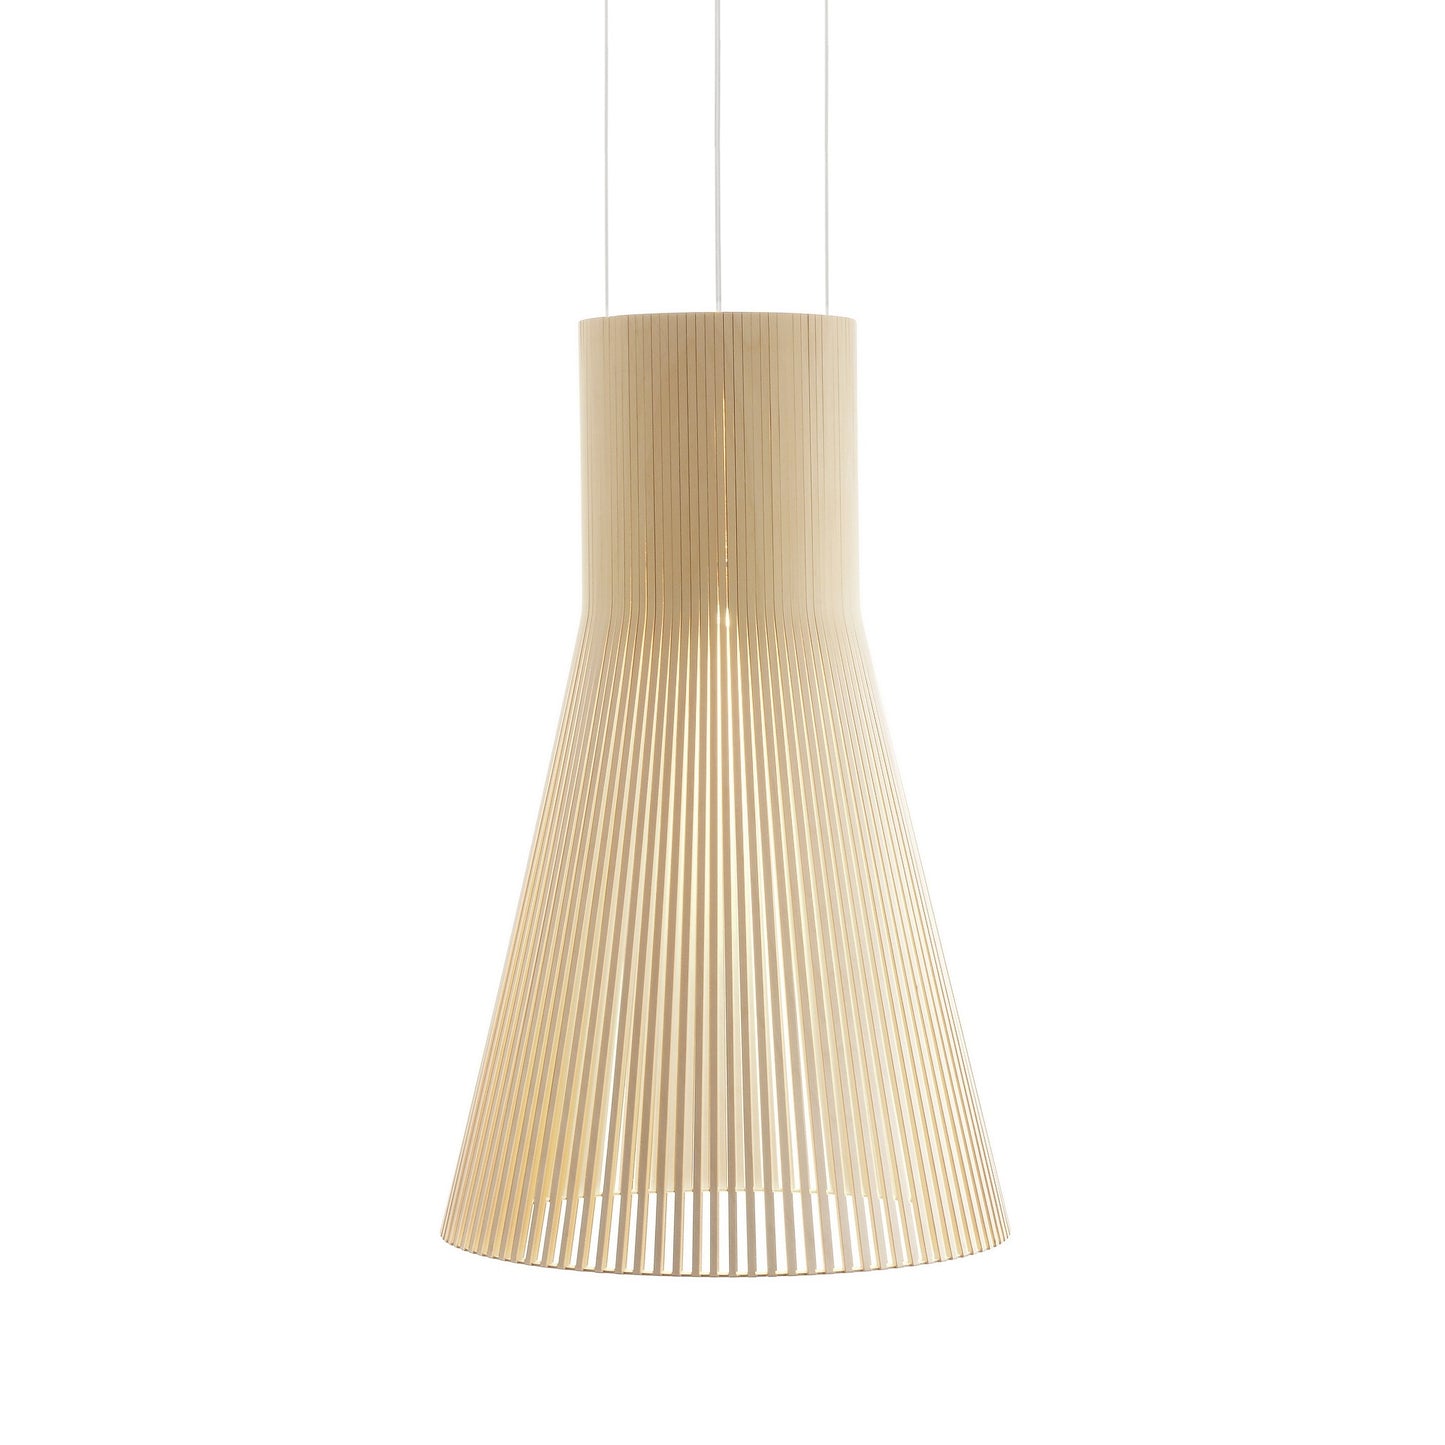 Magnum 4202 Pendant Lamp by Secto #Birch